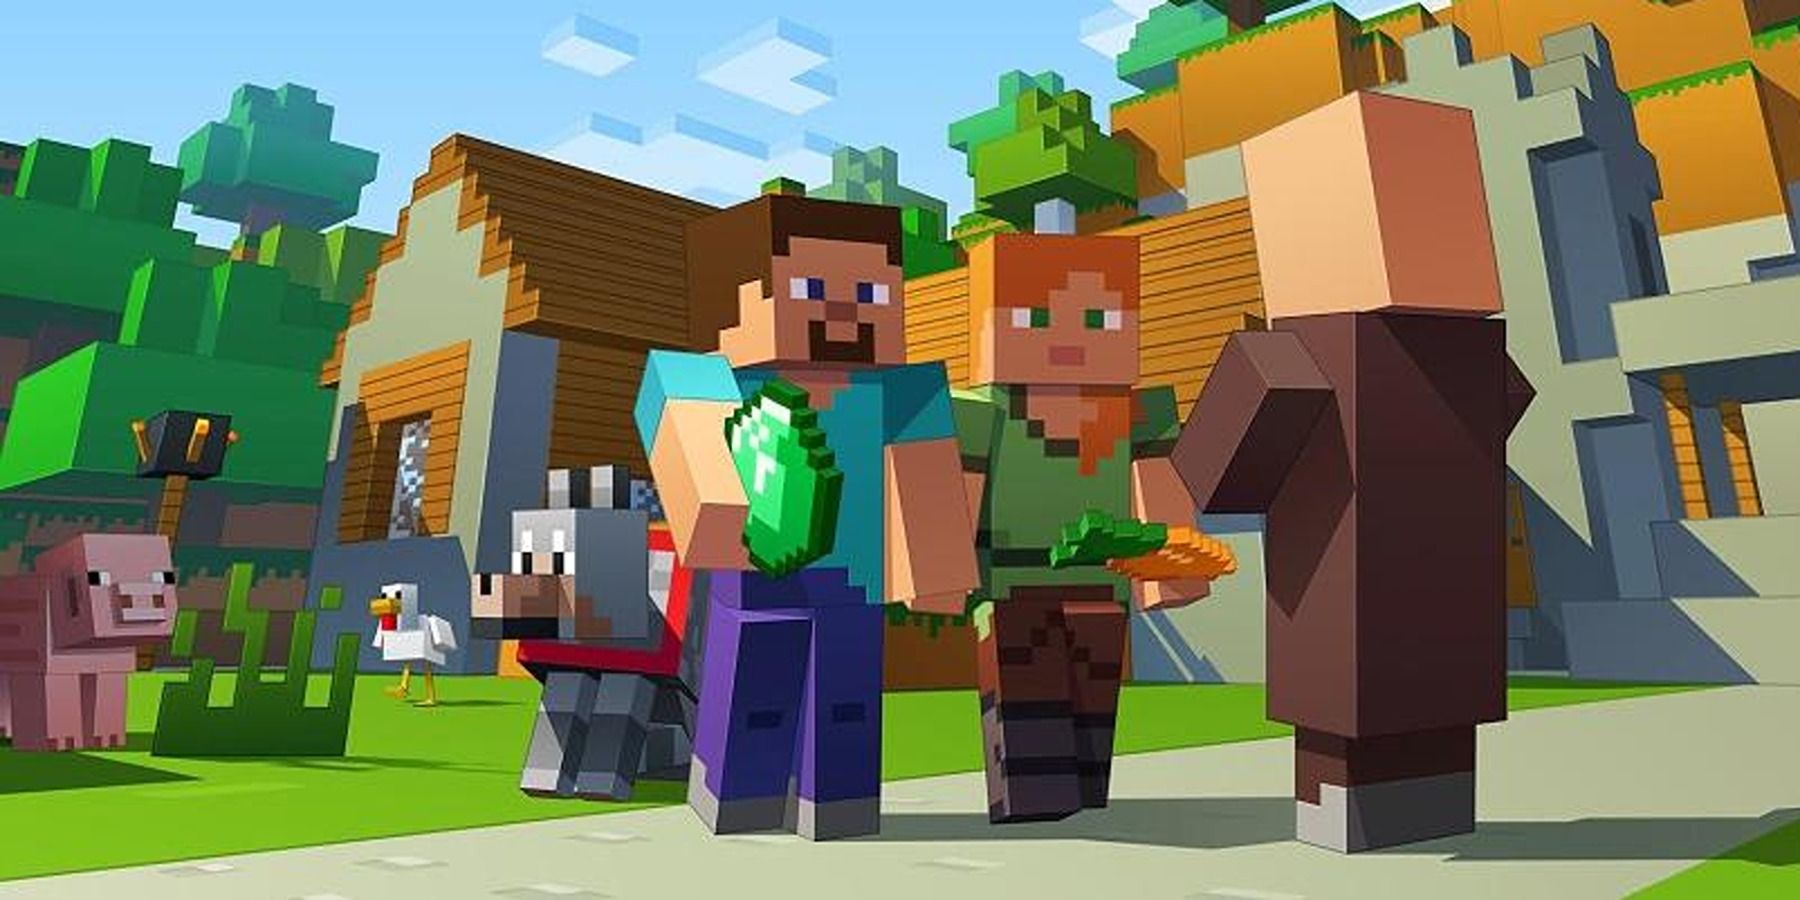 Minecraft Player Builds The Metaverse in the Game